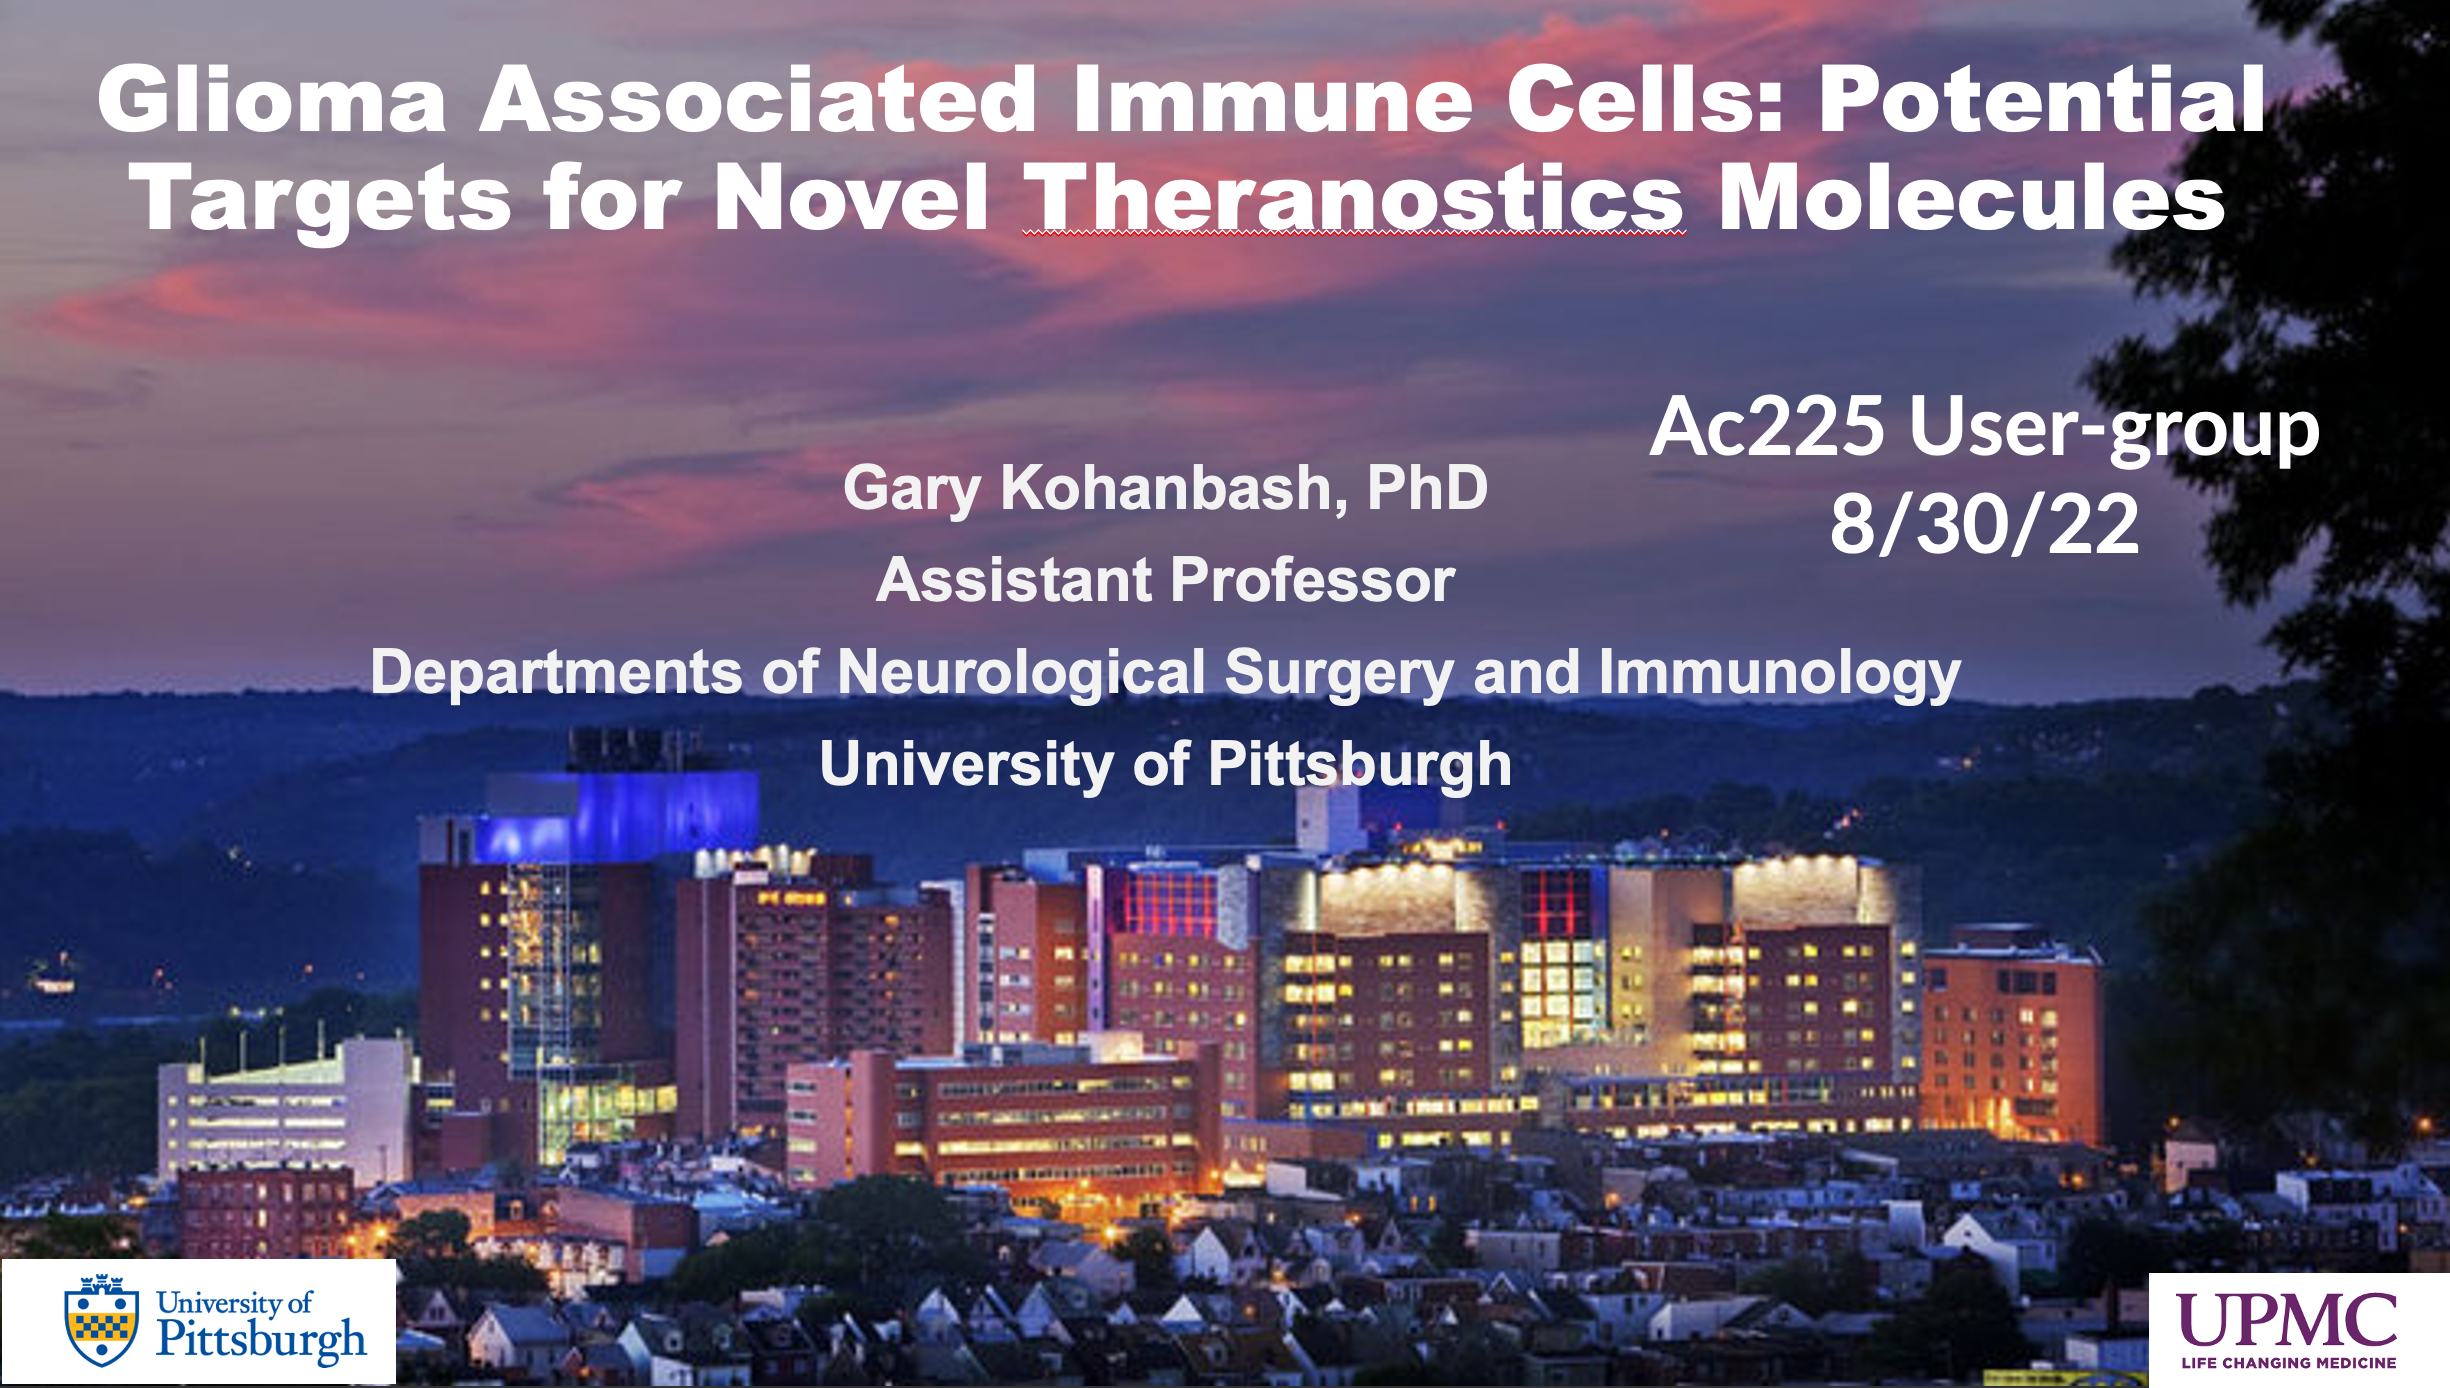 Glioma Associated Immune Cells: Potential Targets for Novel Theranostics Molecules by Gary Kohanbash Ph.D, Departments of Neurological Surgery and Immunology University of Pittsburgh